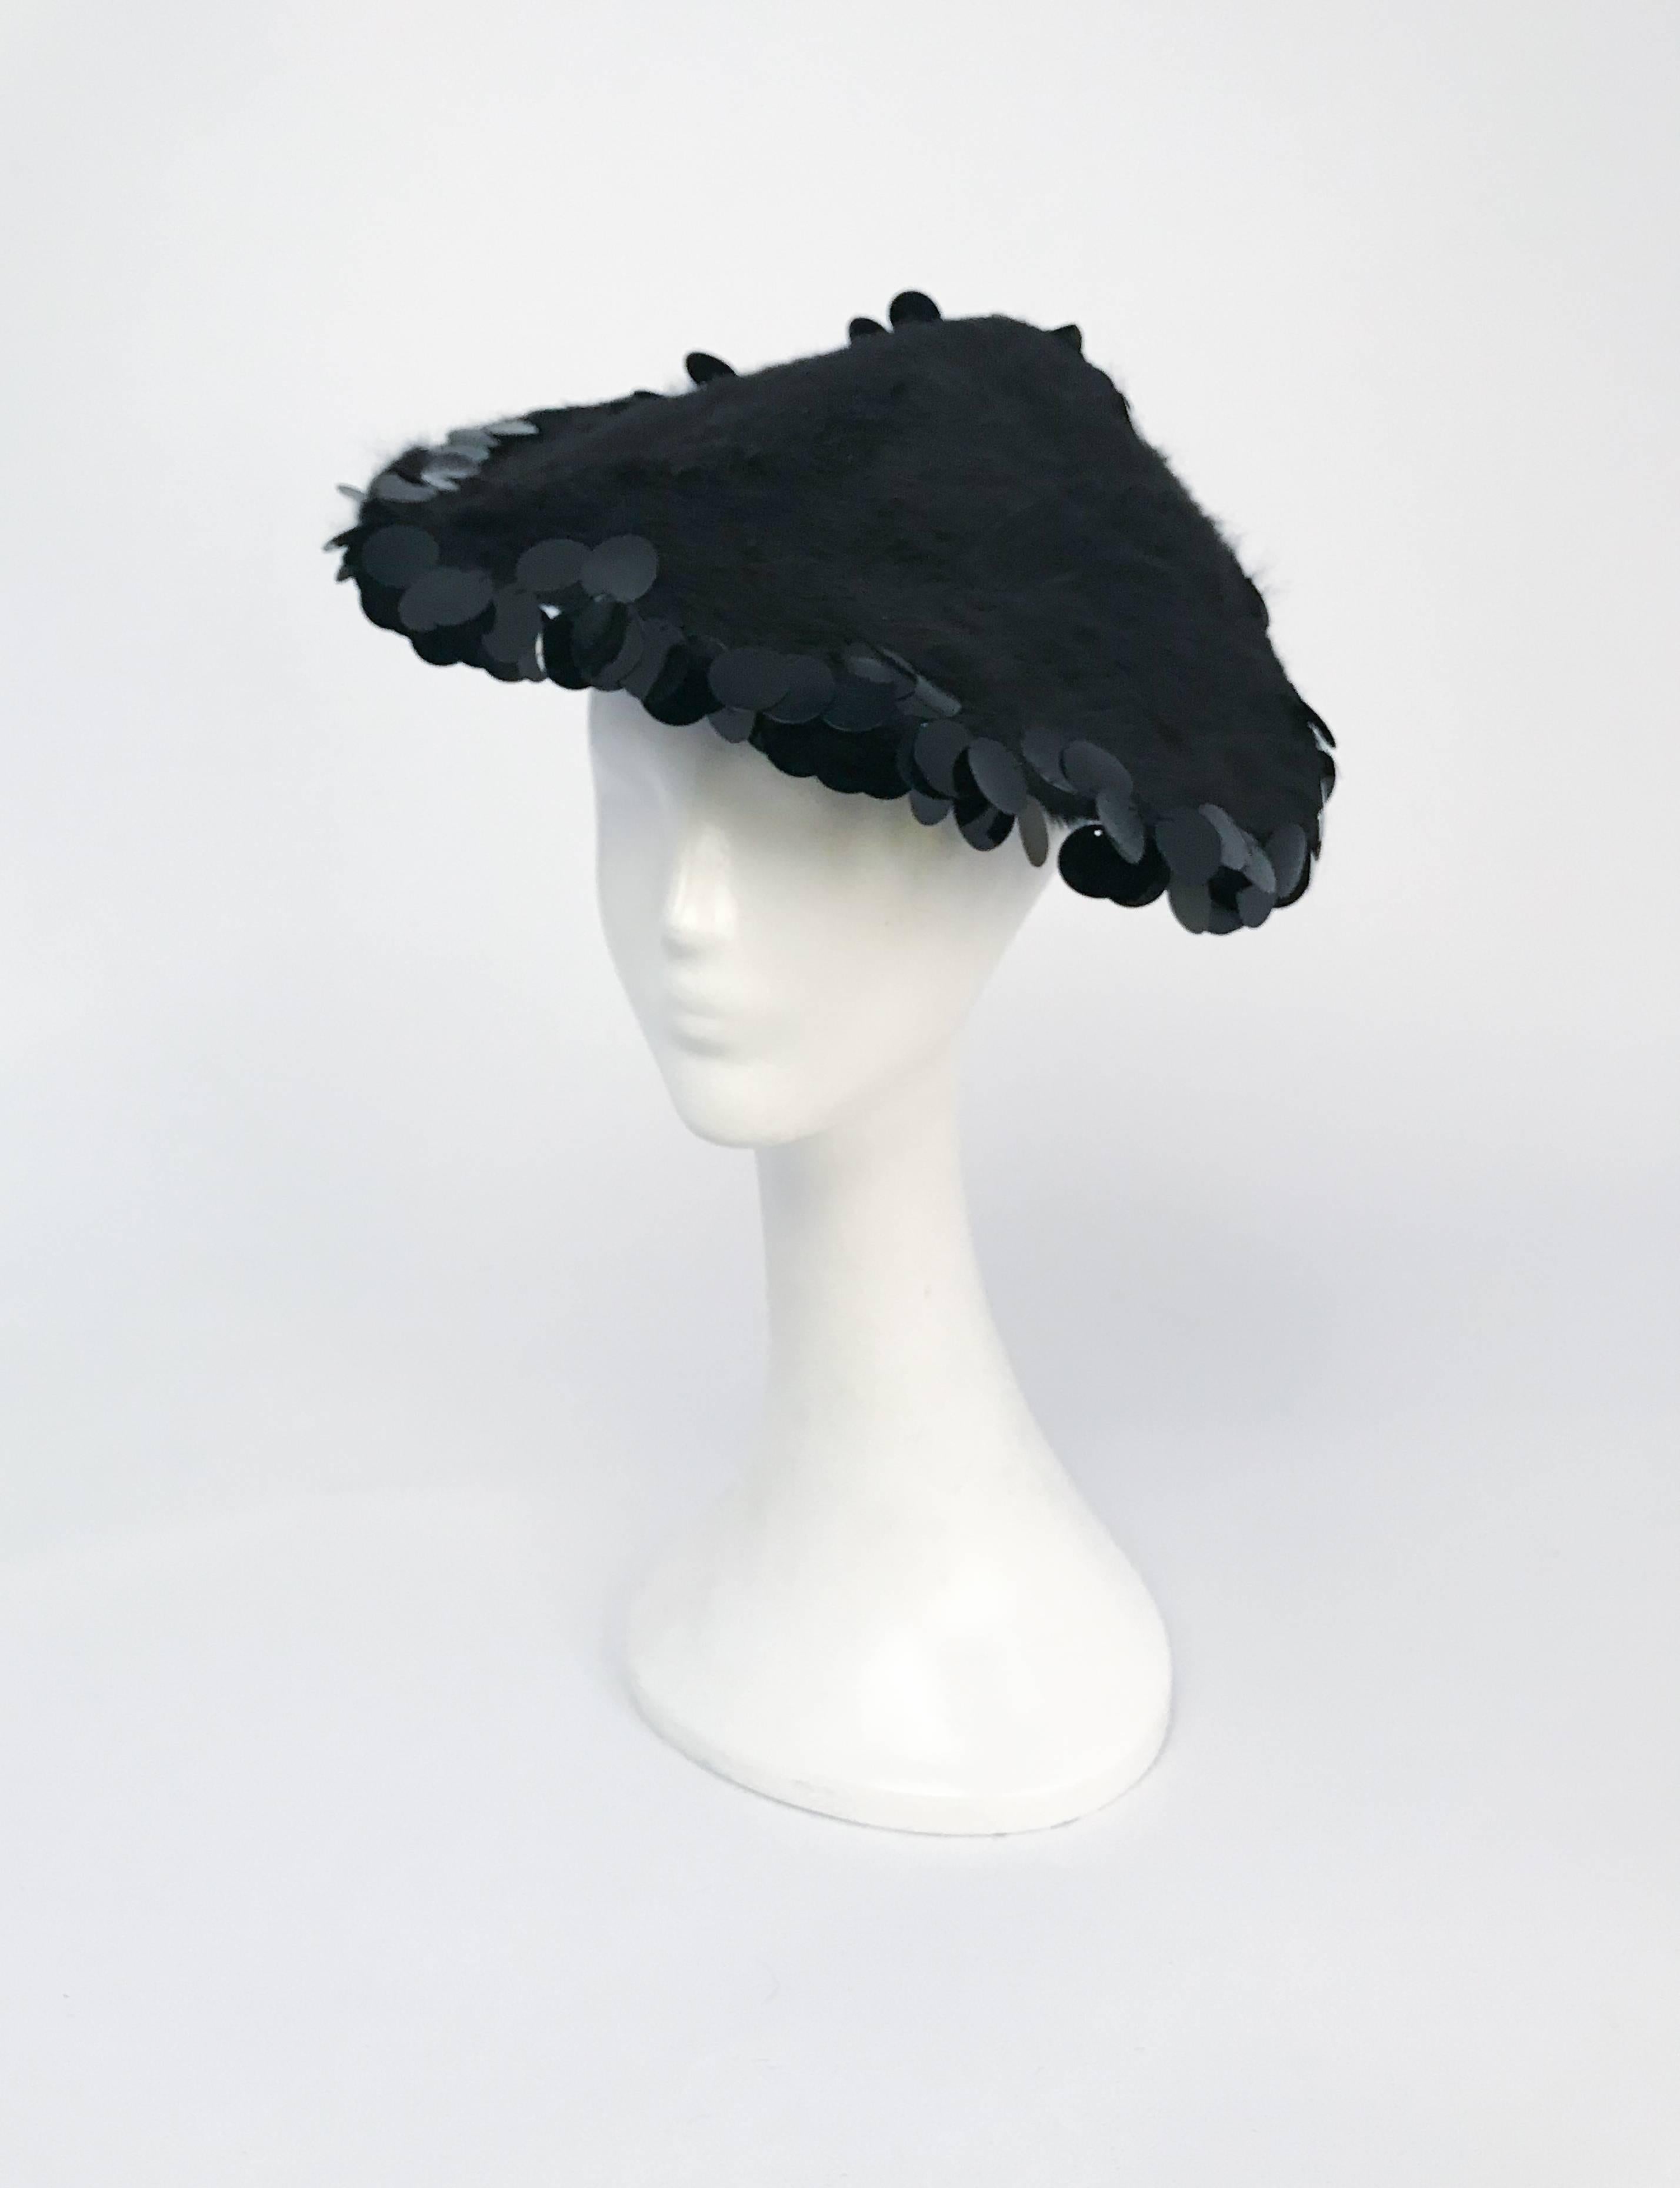 1950s Black Beaver and Sequin Hat. Beaver hat with sequin trim detail. Elastic to secure hat to head. 